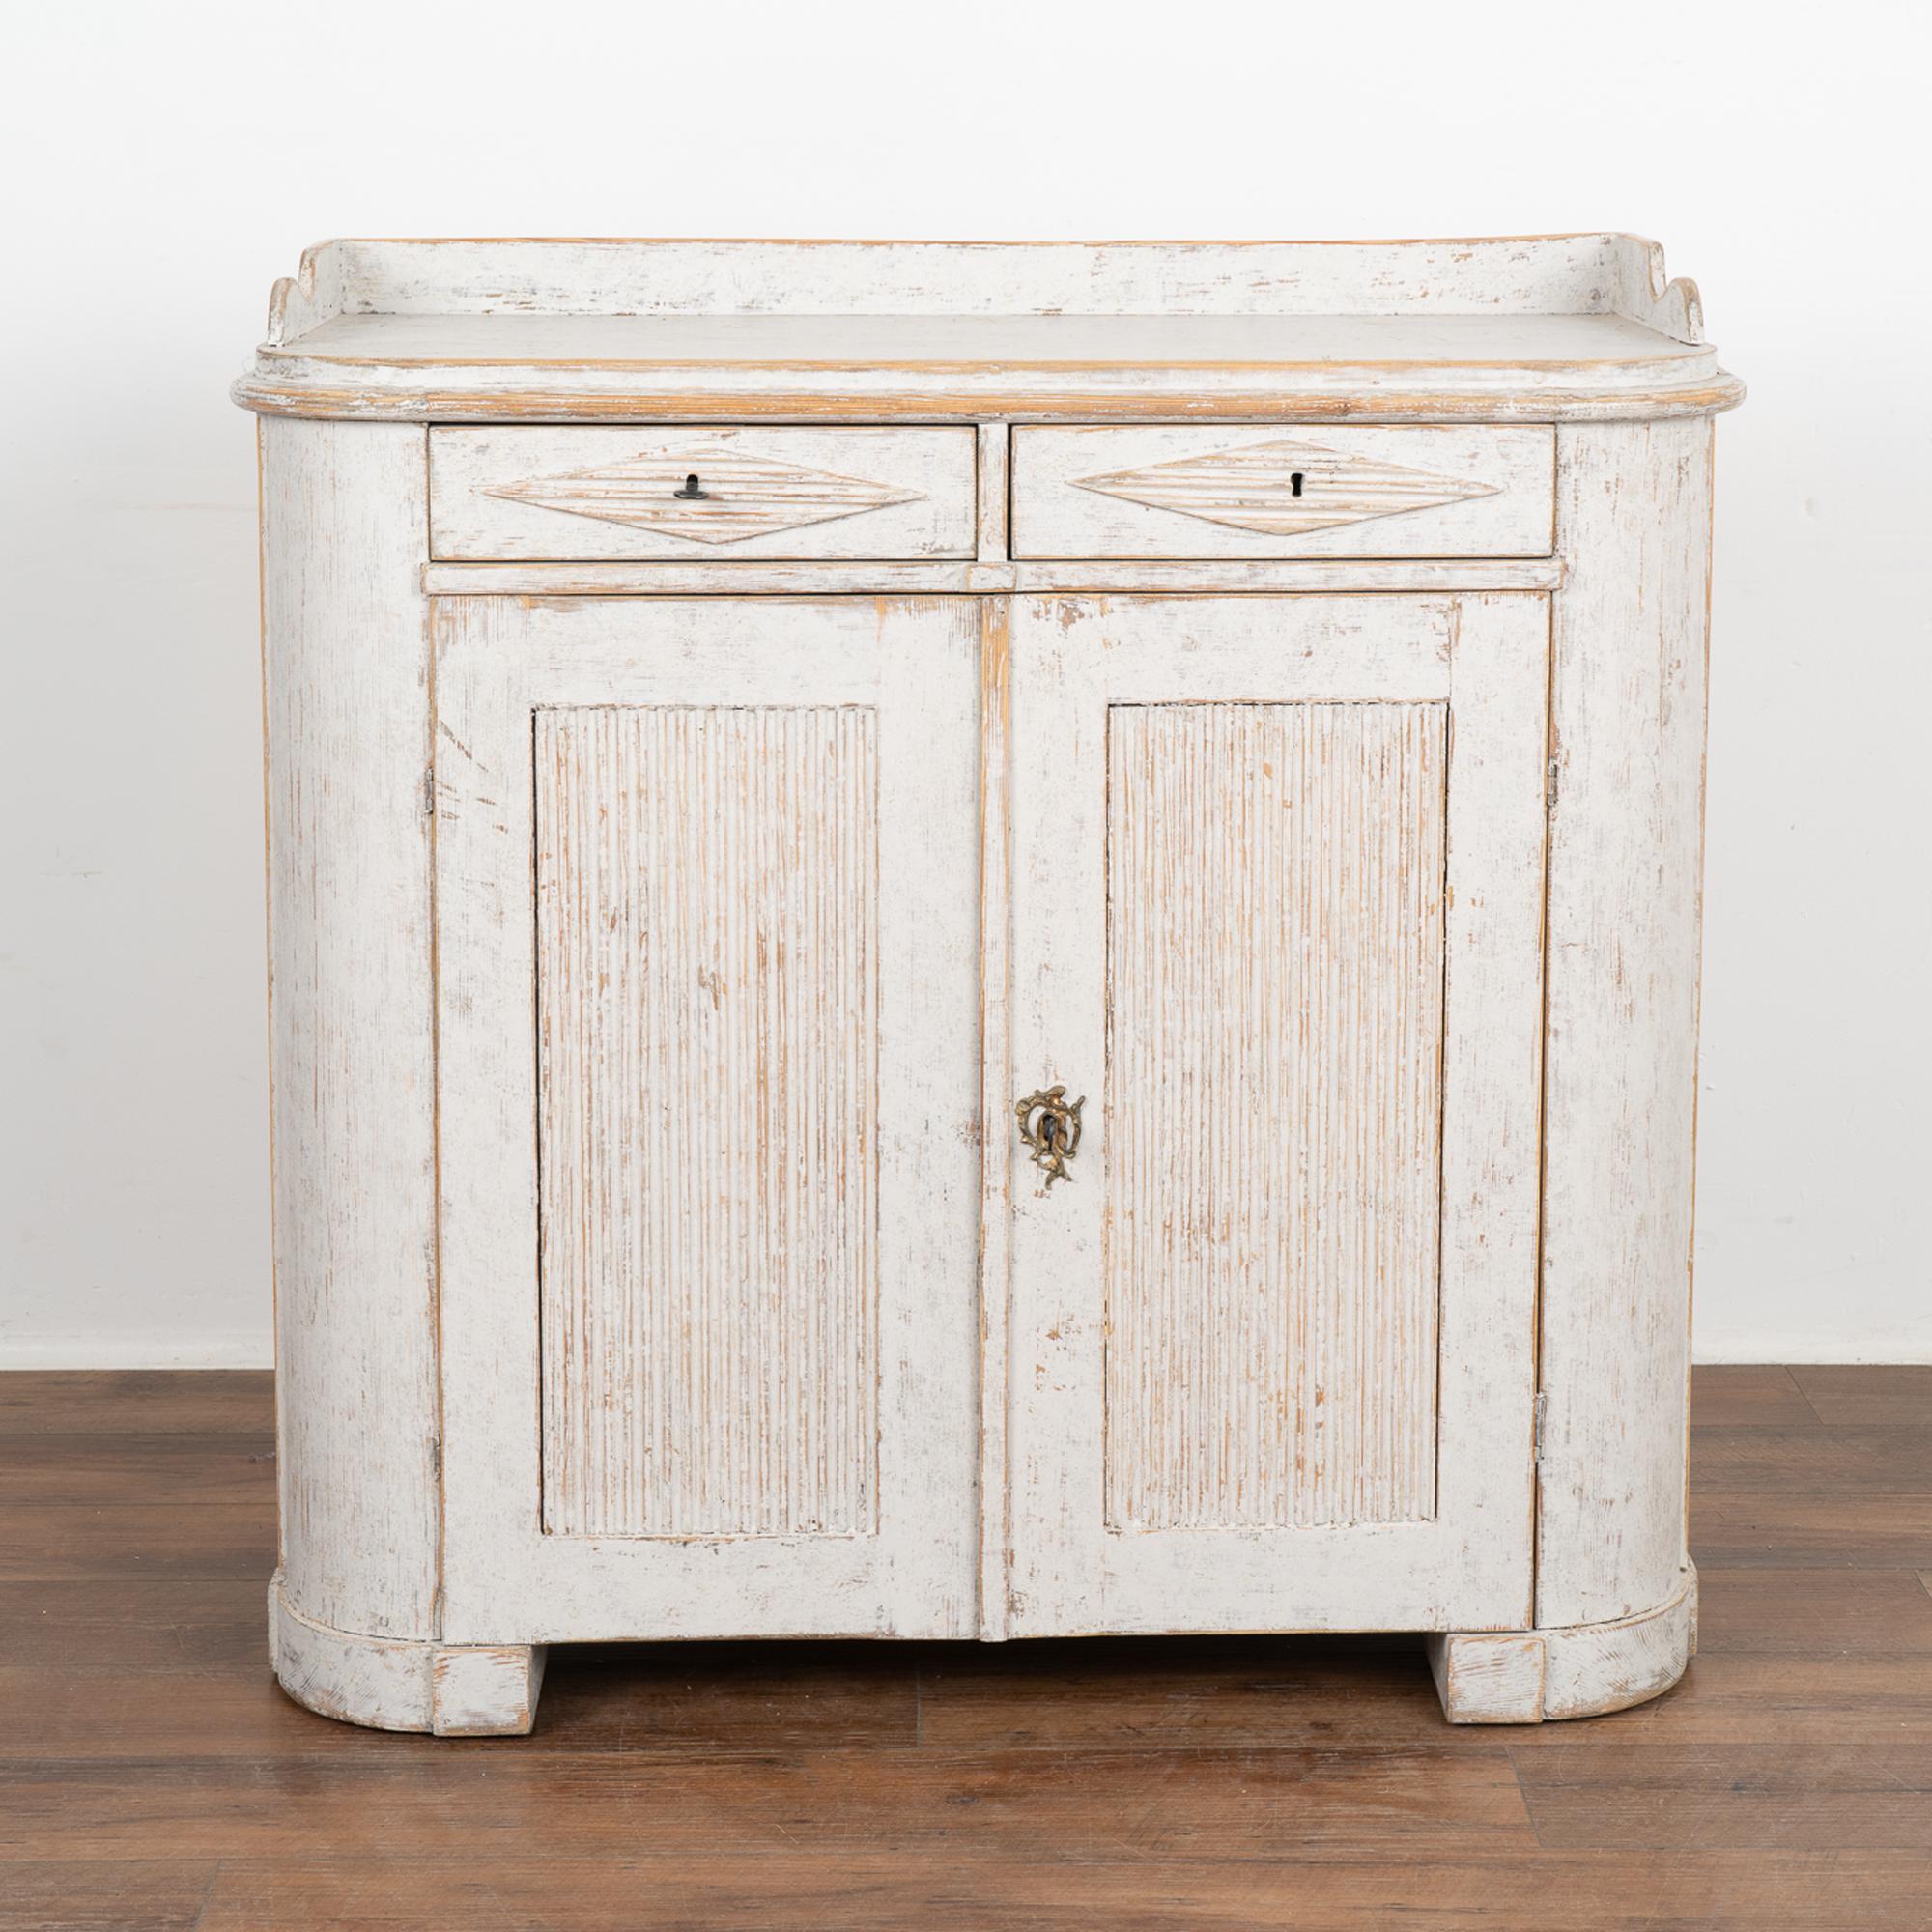 Swedish White Sideboard Cabinet from Sweden, circa 1860-80 For Sale